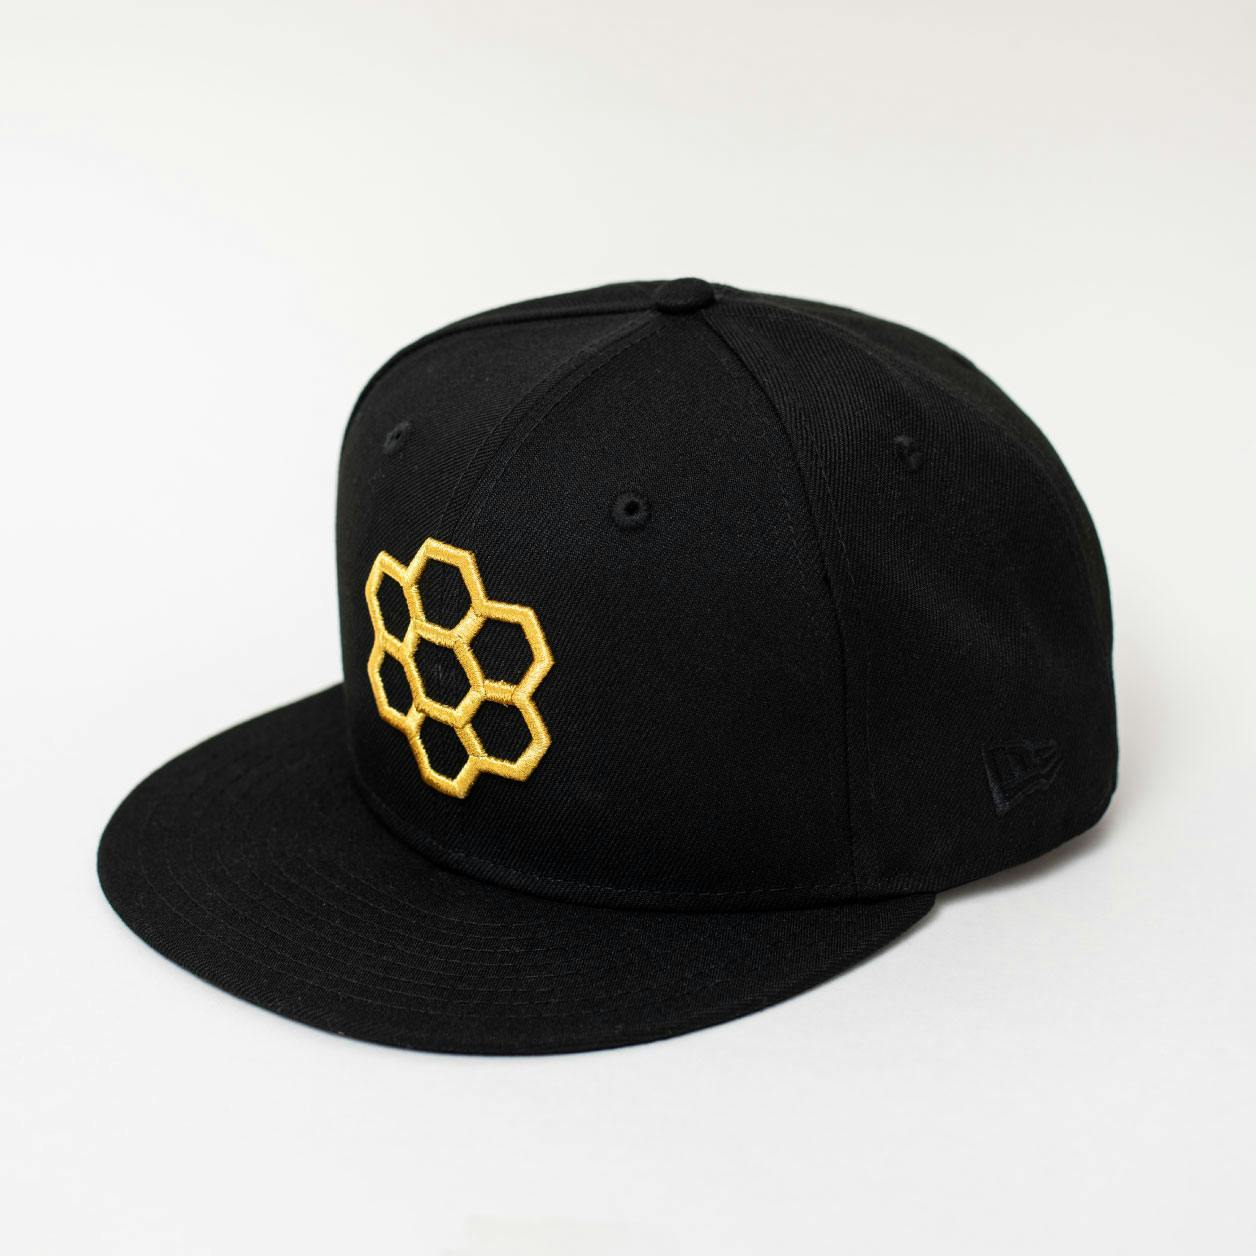 Hunny Pot - Large Gold Icon Black New Era Hat - M/L  The Hunny Pot Cannabis  Co. (202 Queen St W, Toronto)